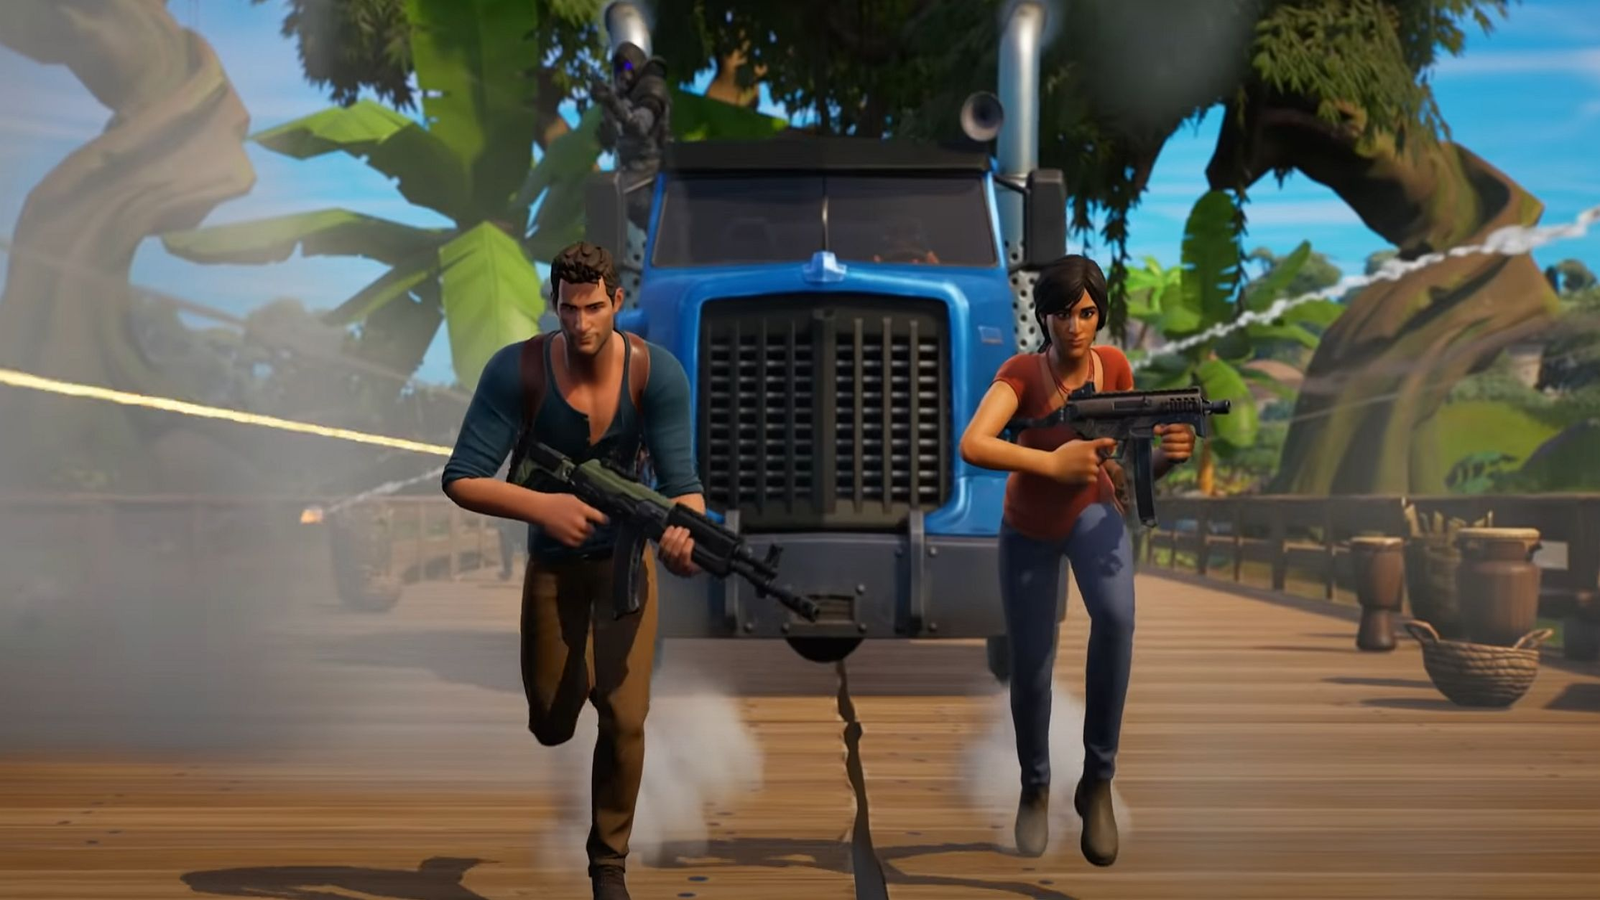 Uncharted-Fortnite crossover brings Nathan Drake to the game this week -  Polygon